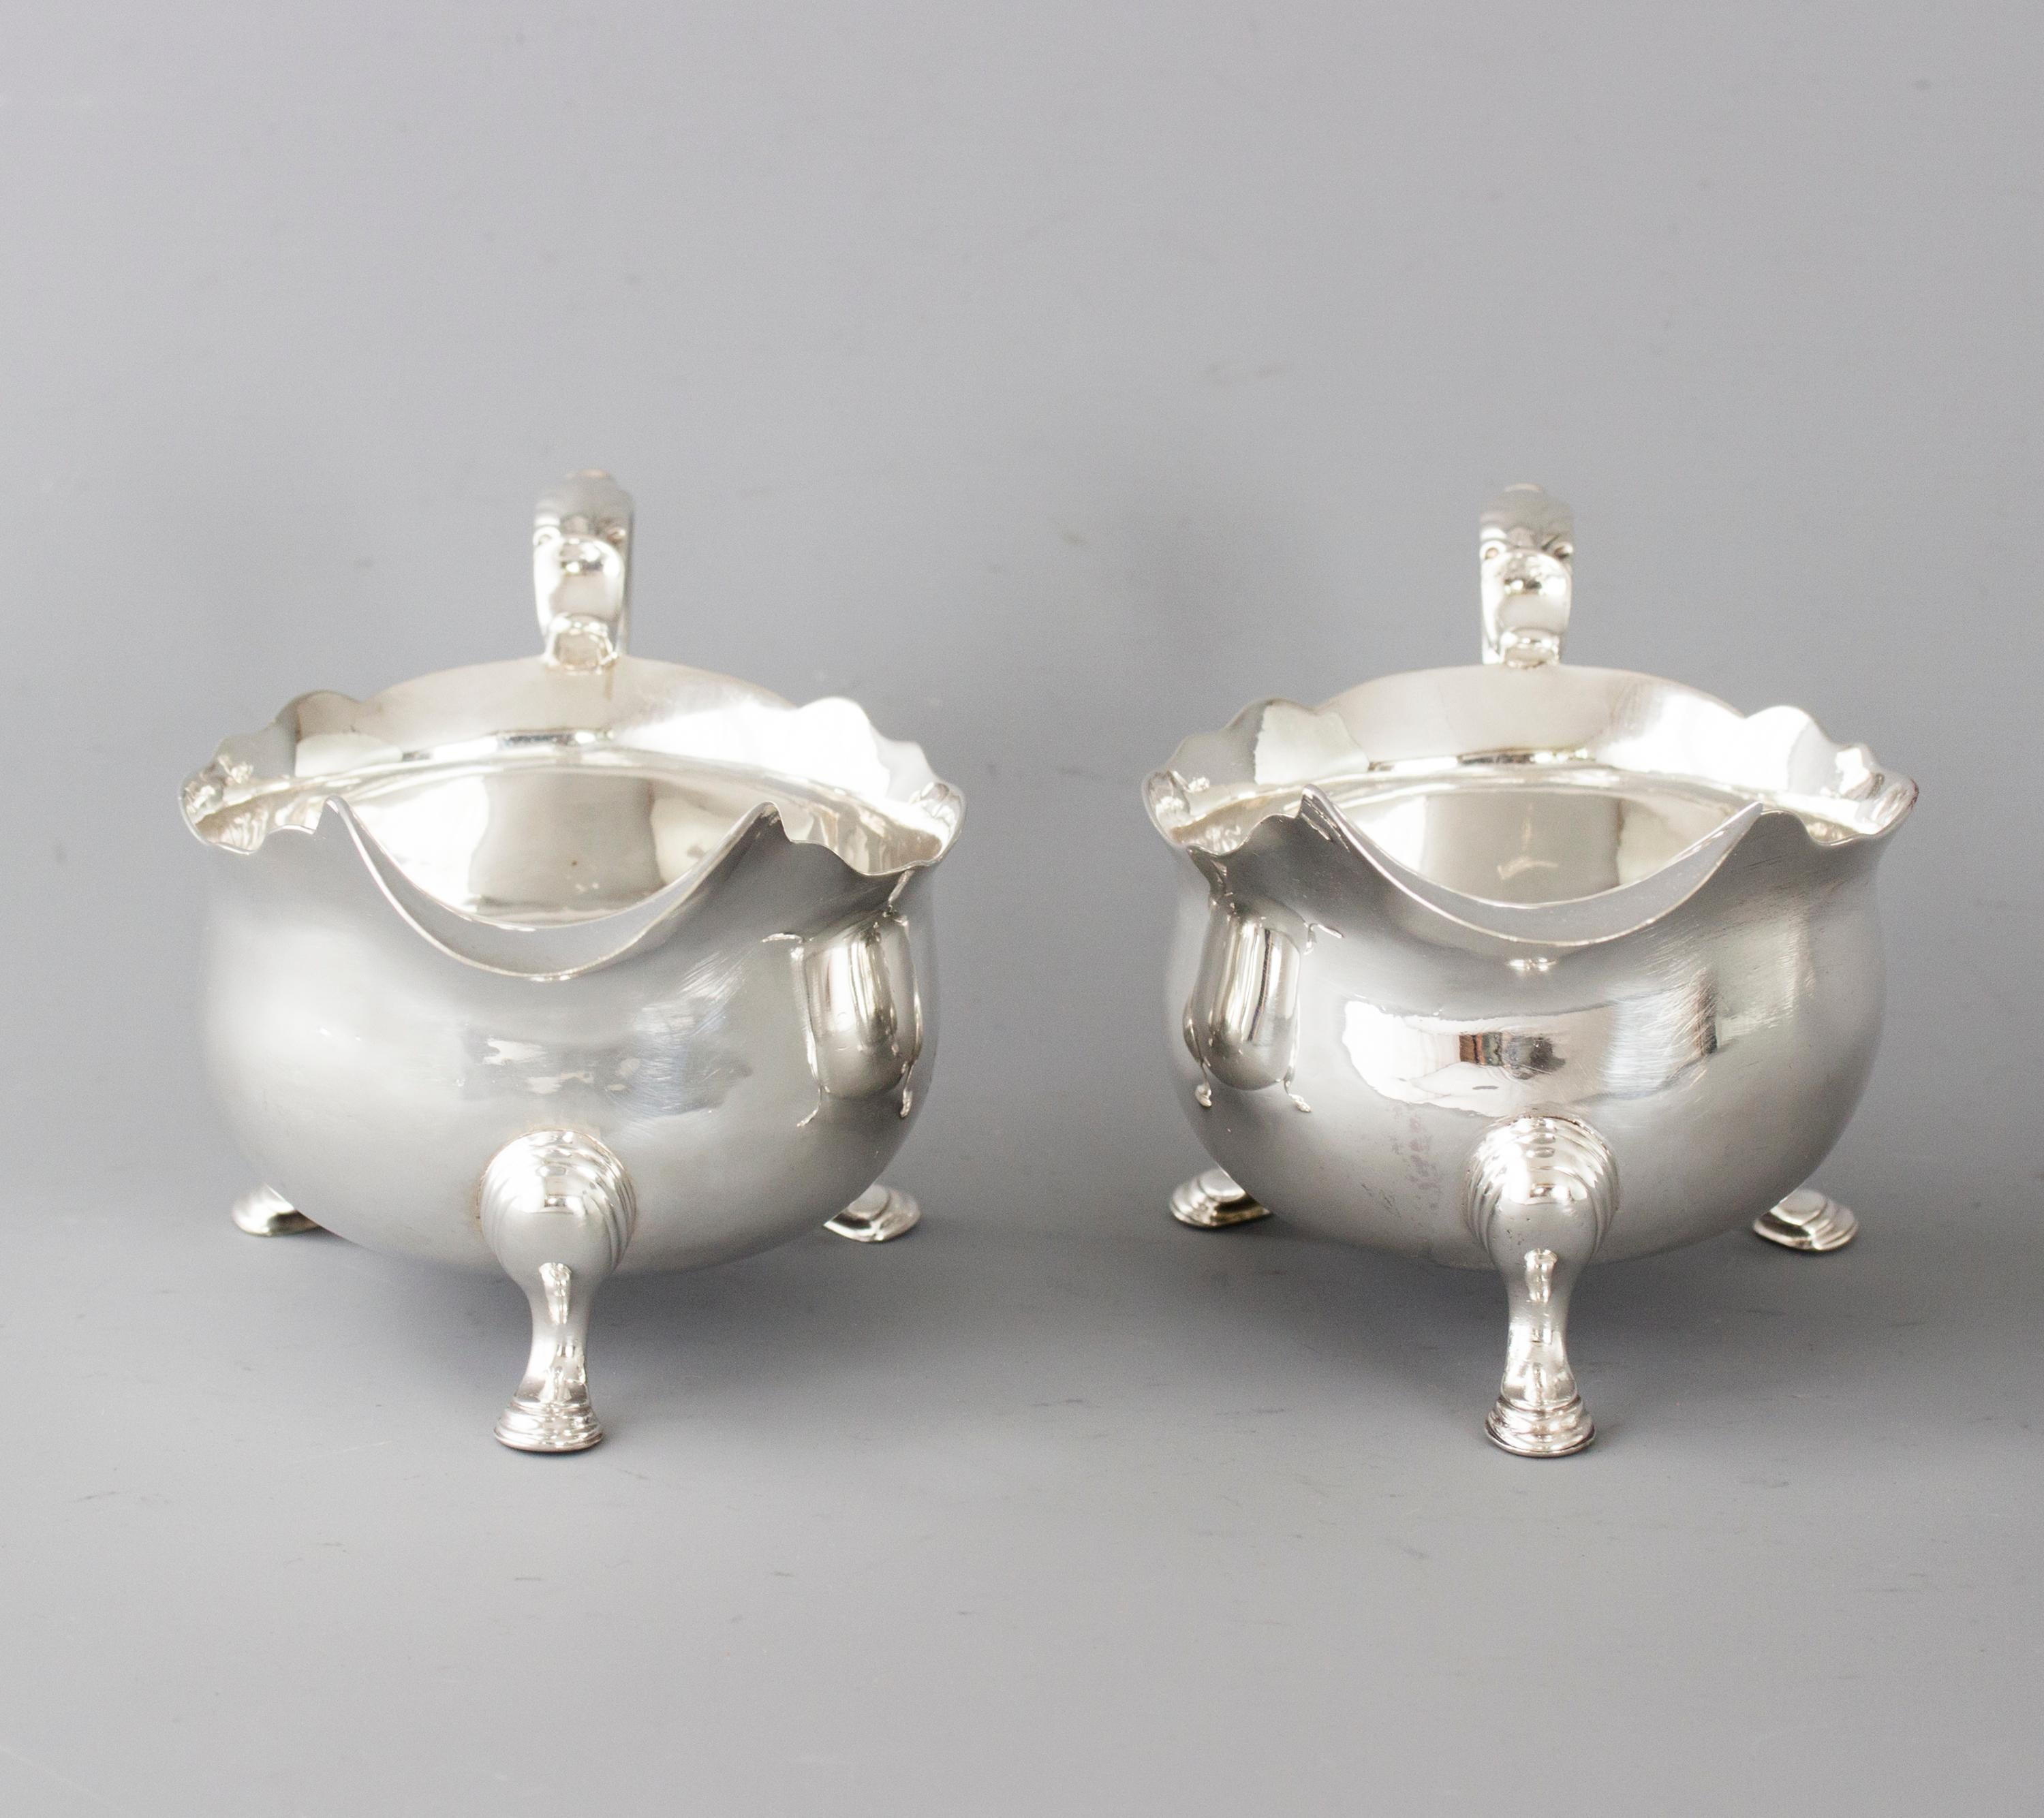 British Pair of George II Silver Sauce Boats, London, 1737 by Benjamin West For Sale